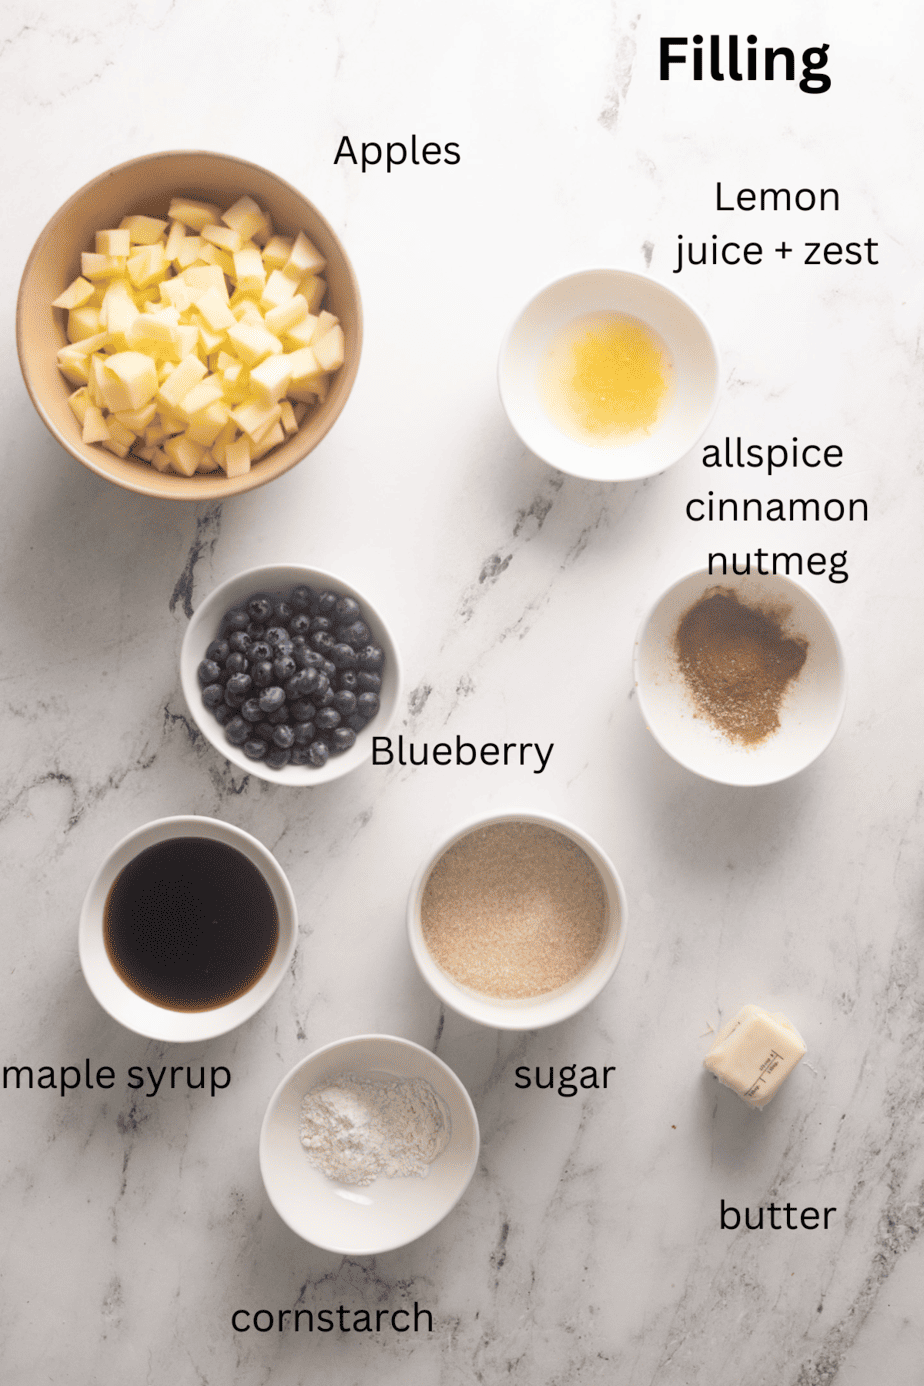 ingredients for filling all in separate bowls with text labels